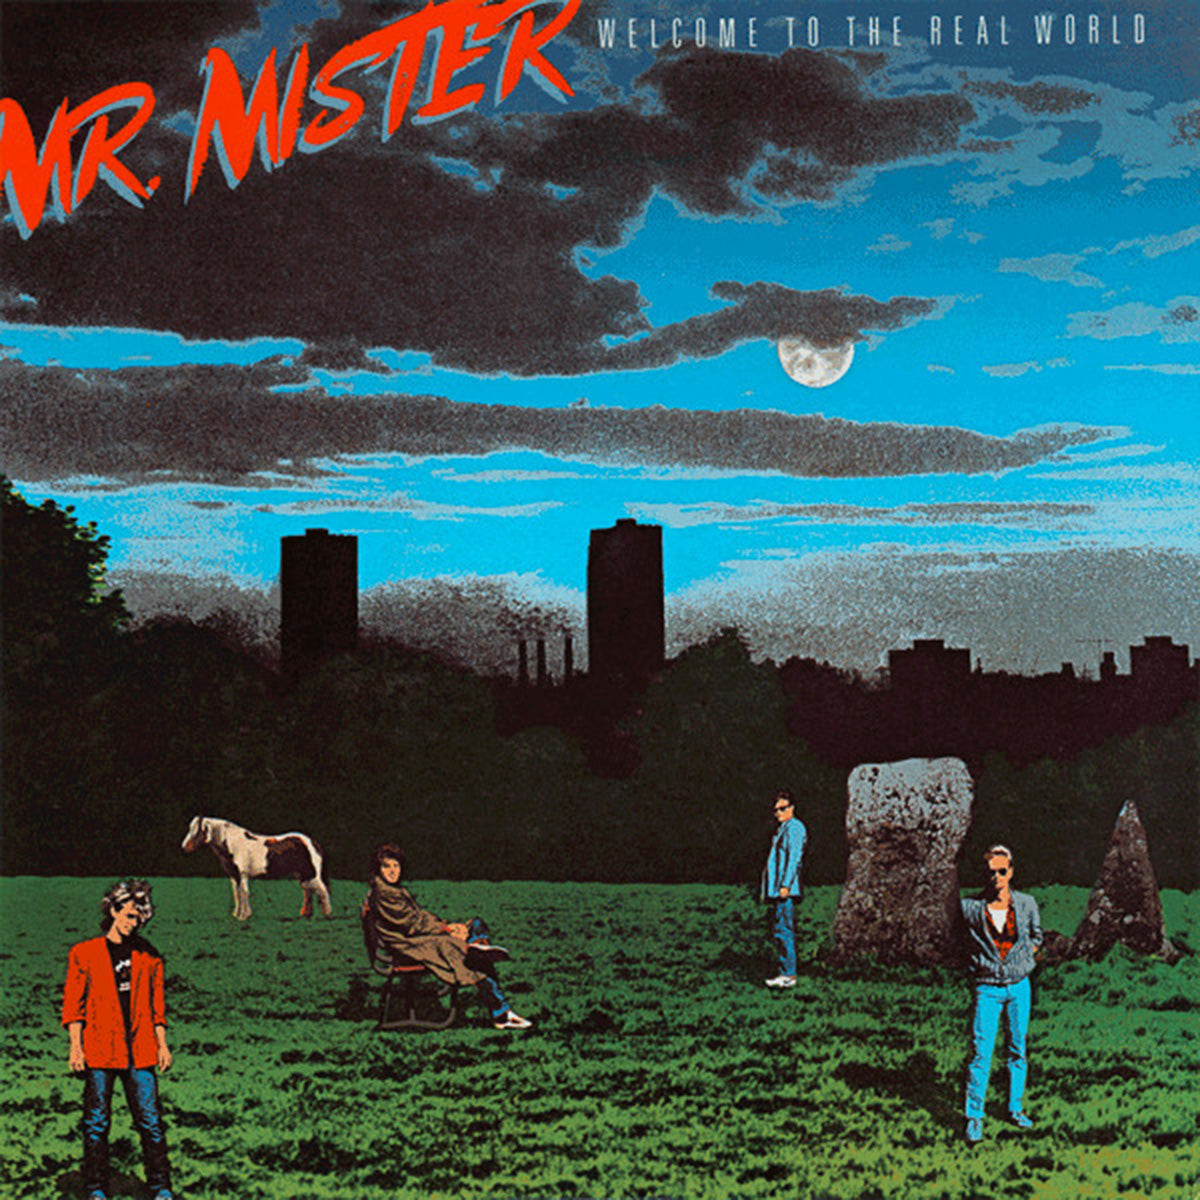 Mr. Mister – Welcome To The Real World - 1985 Pressing